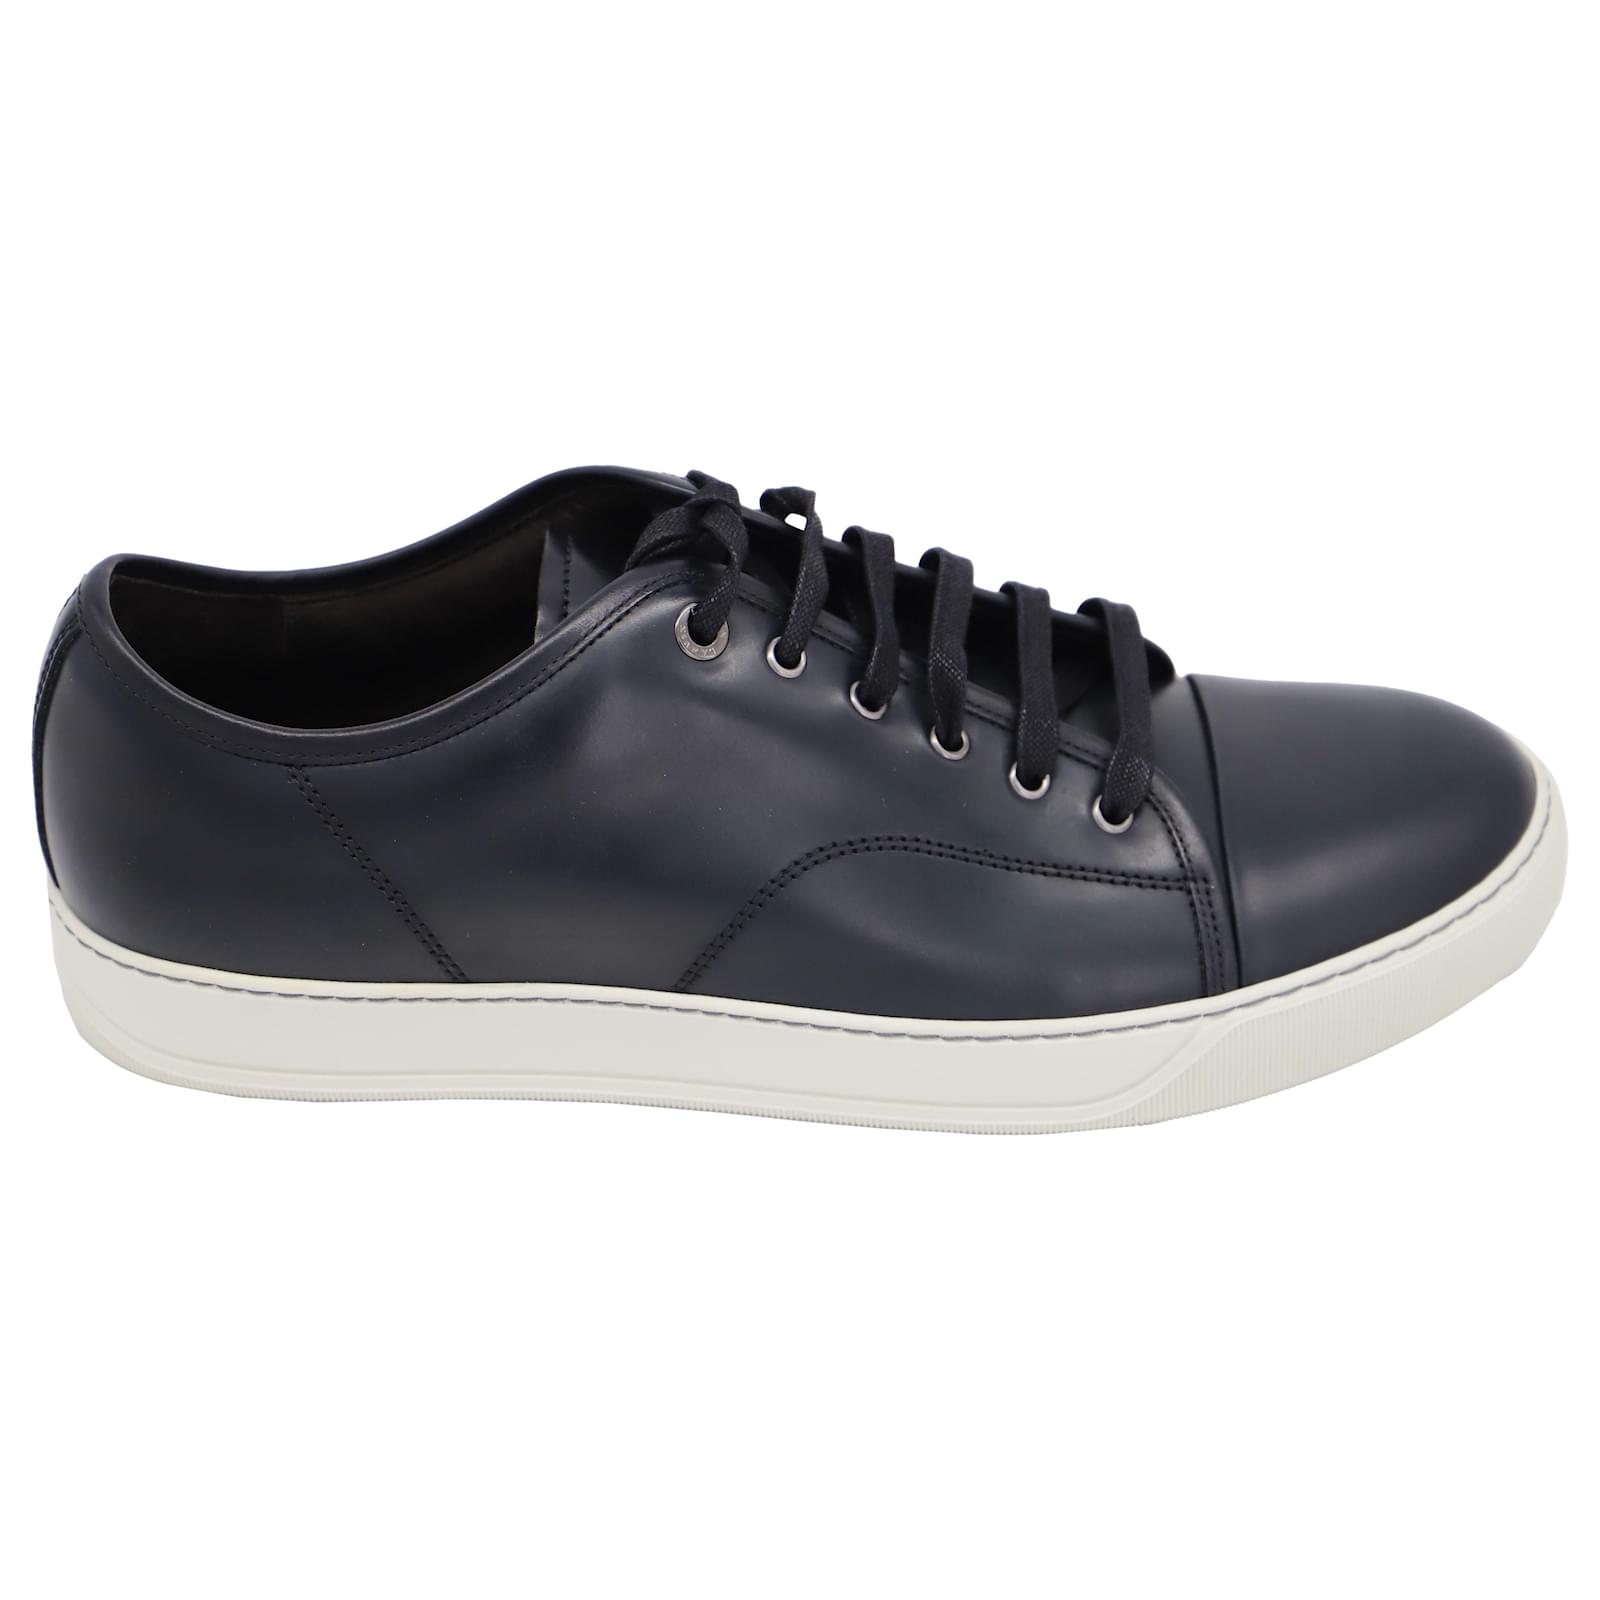 Lanvin DBB1 Lace-Up Sneakers in Black calf leather Leather ref.522497 ...